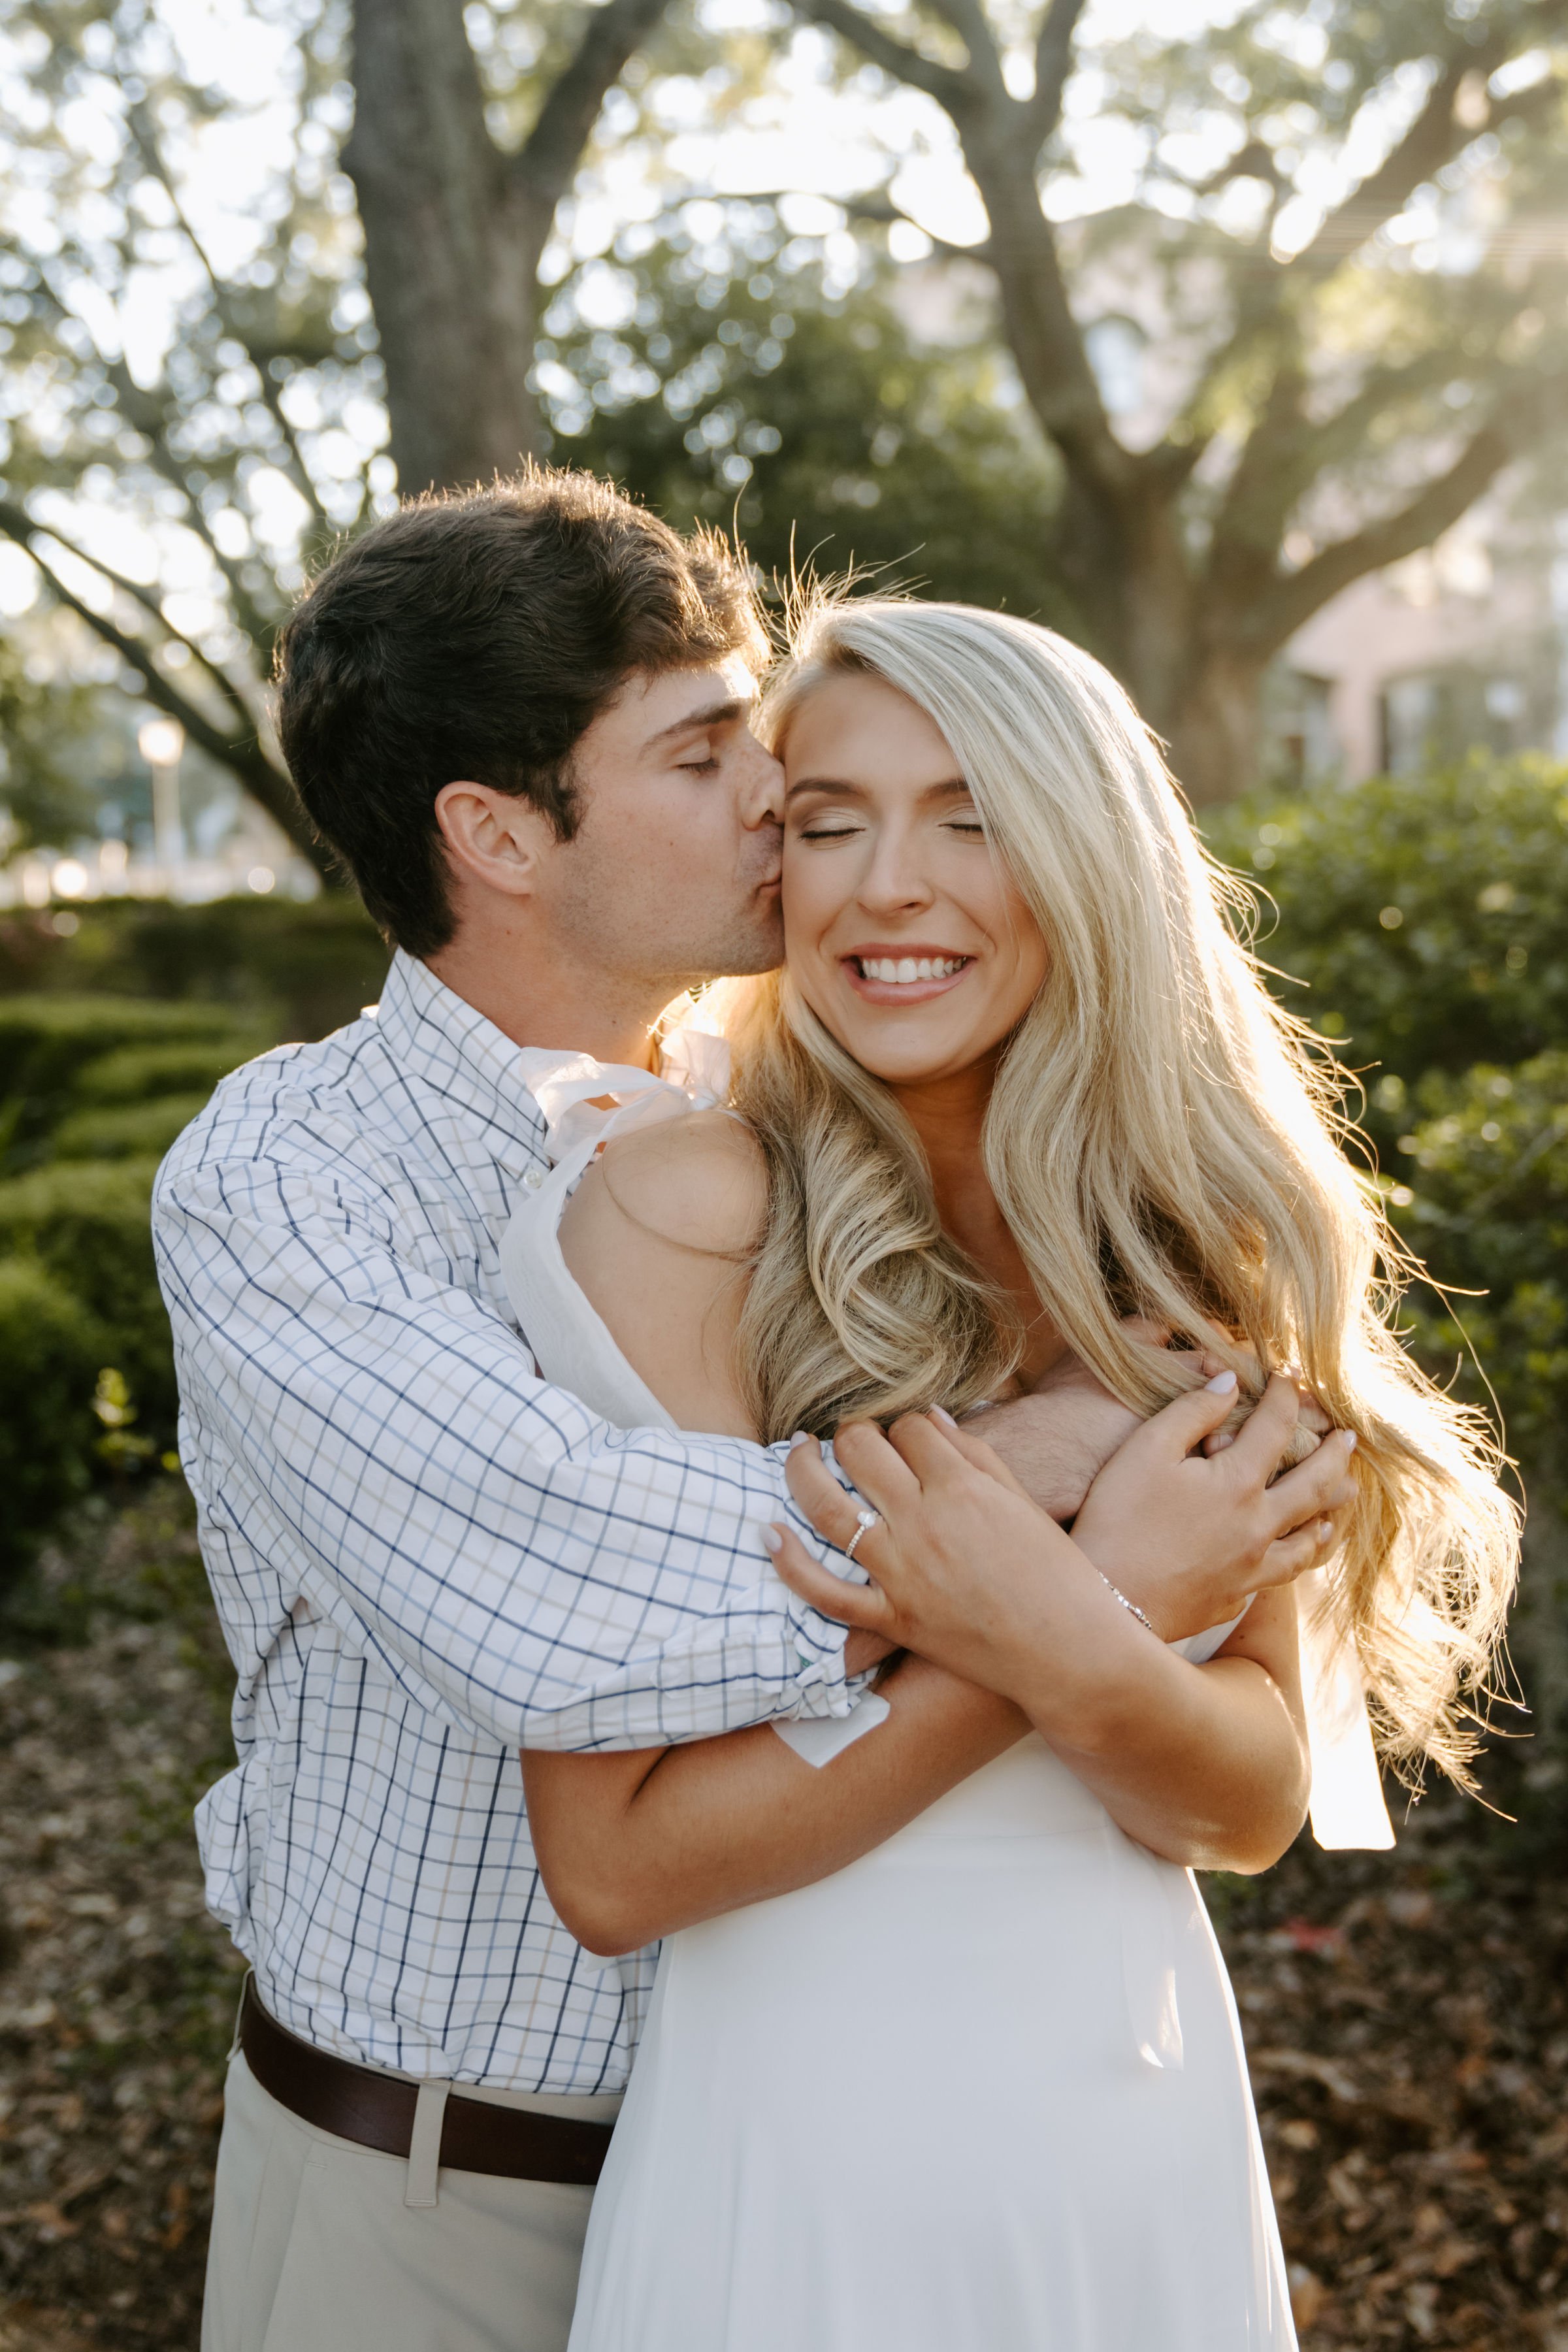 How To Make The Most Of Your Engagement Session | Georgia Wedding Photographer9.jpg